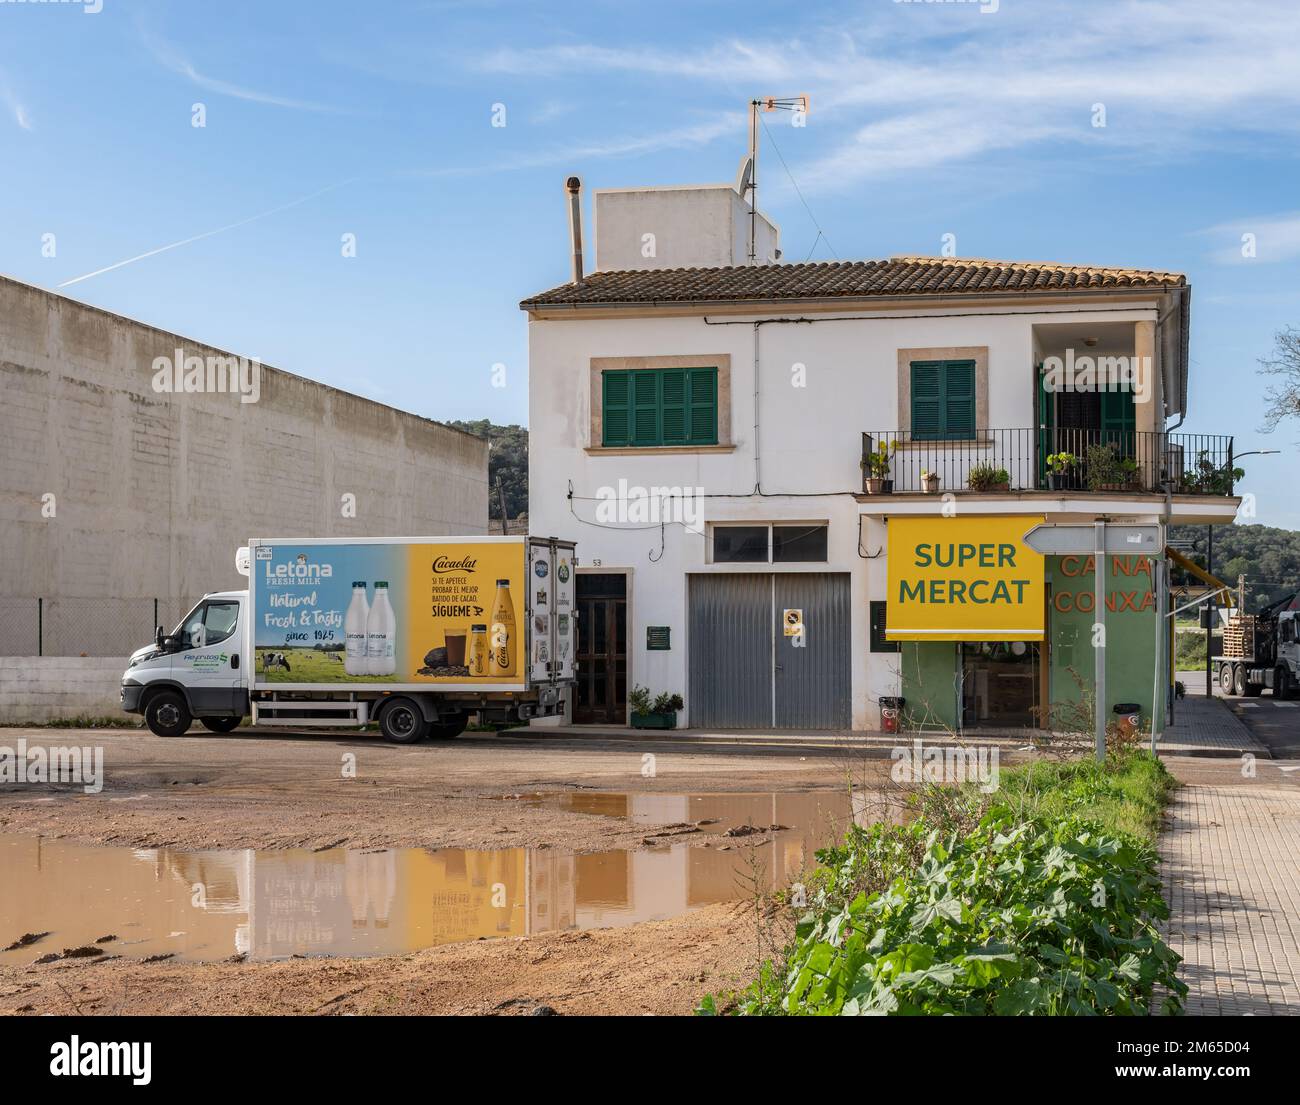 Felanitx, Spain; december 30 2022: Delivery truck of the chocolate milkshake brand Cacaolat, parked next to a small supermarket in the Mallorcan town Stock Photo